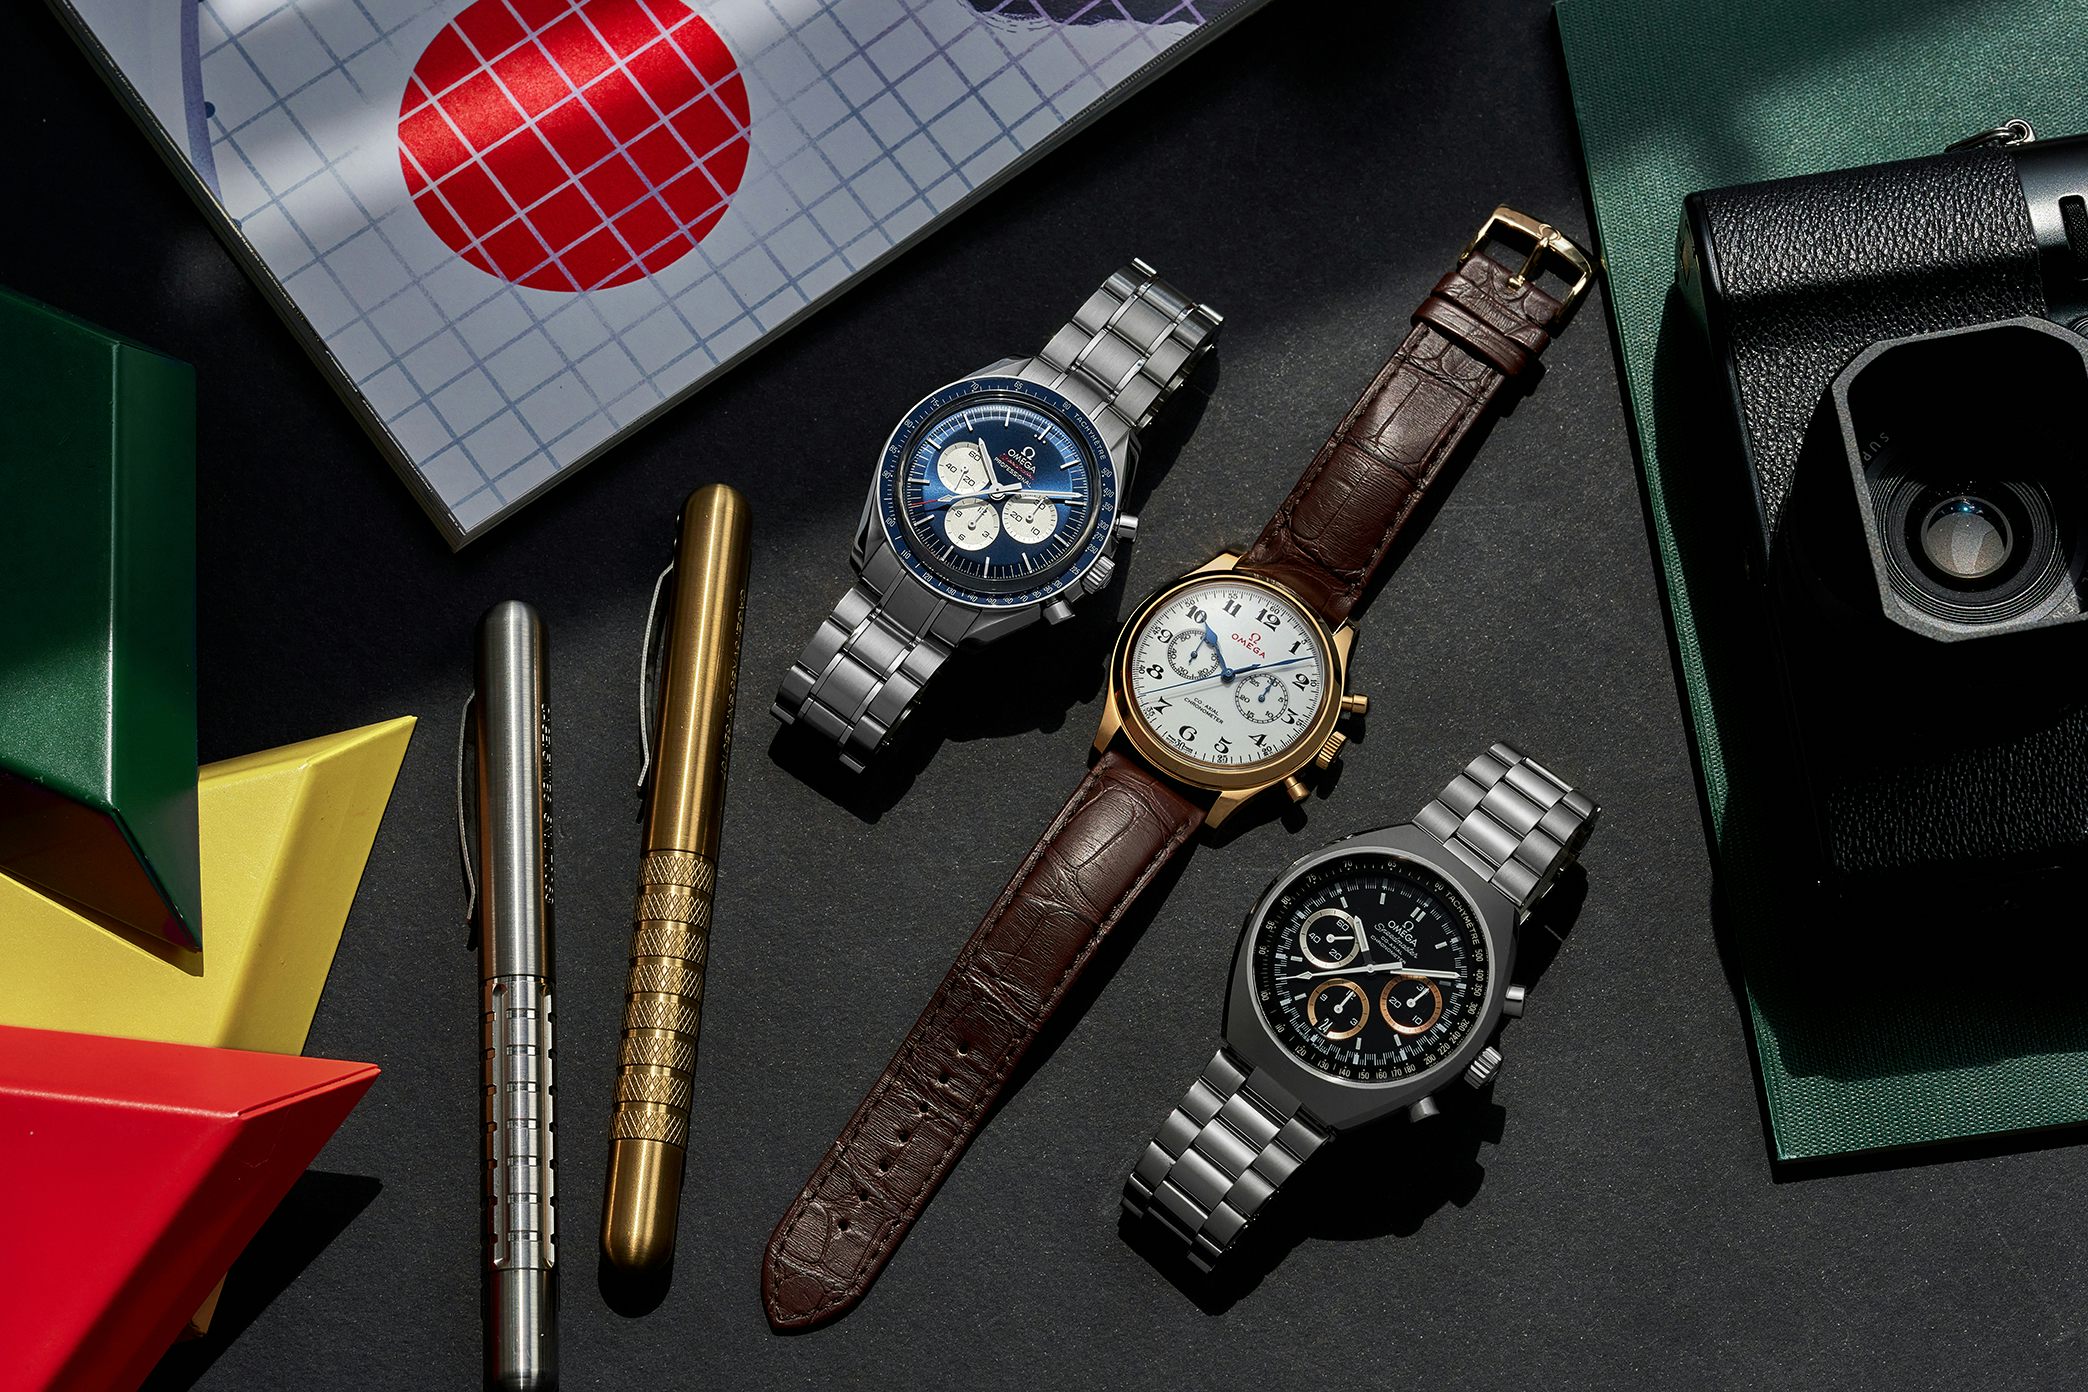 Pre-Owned Picks from the Hodinkee Shop